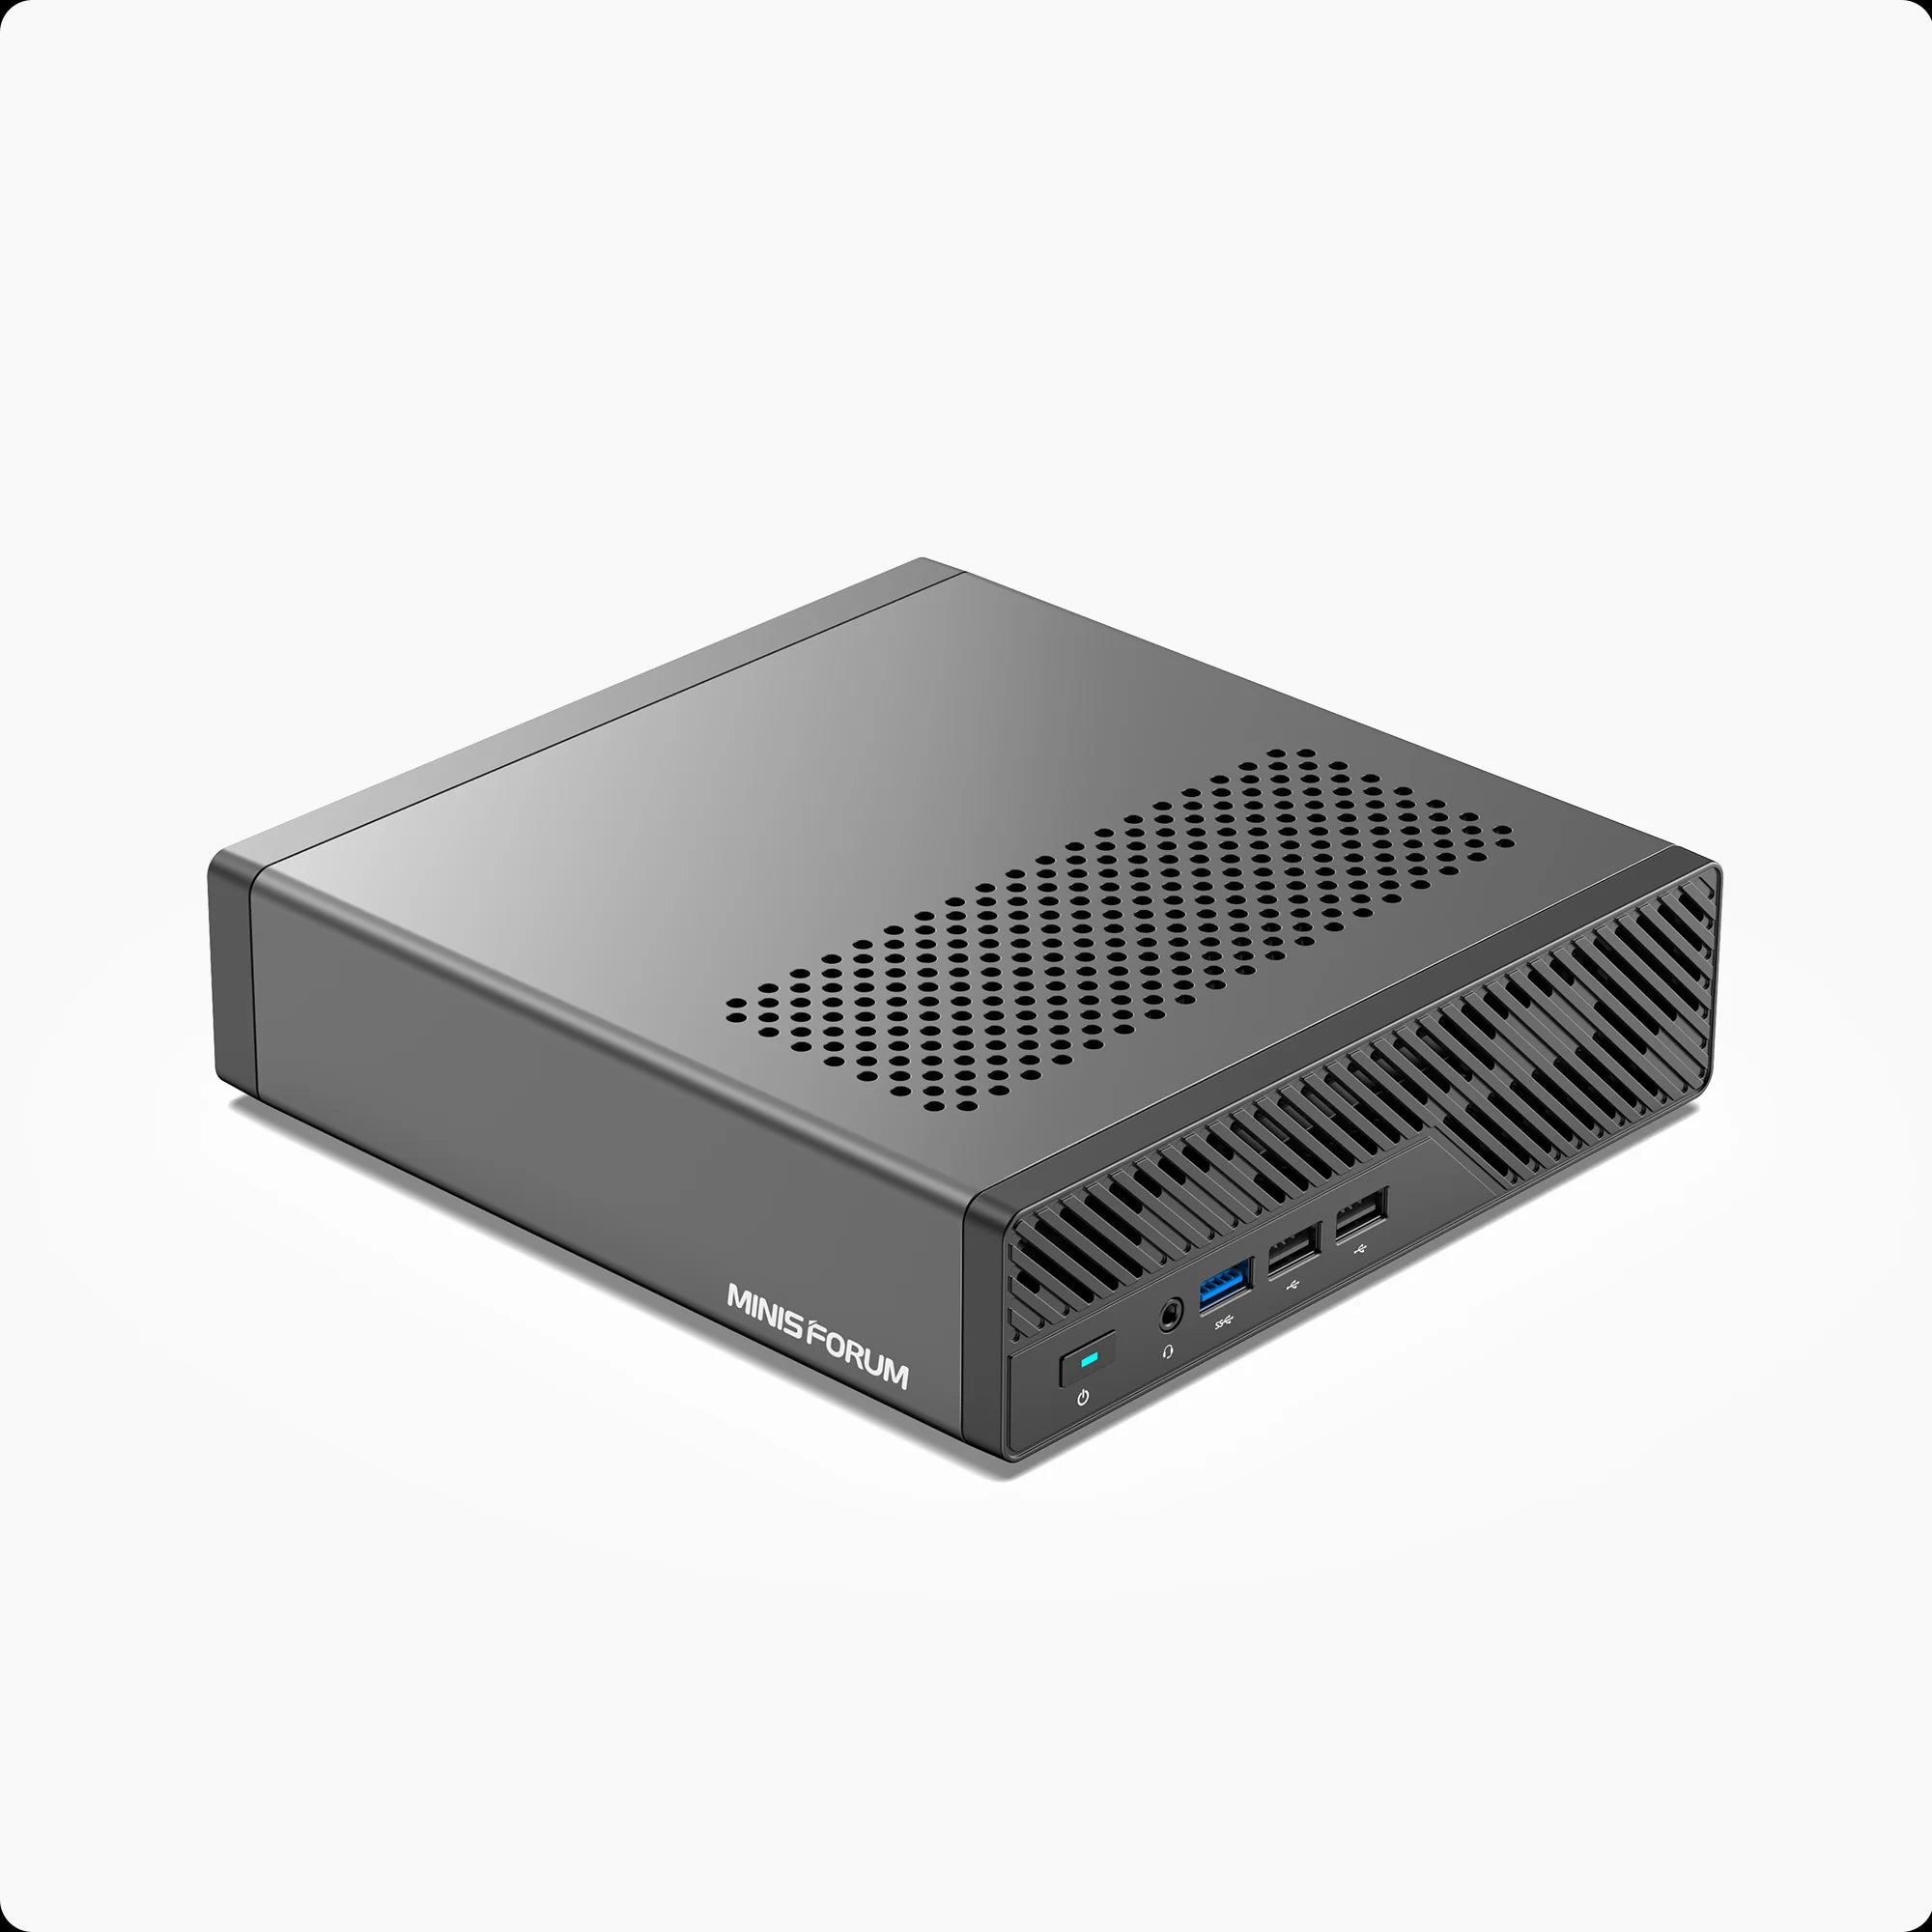 MINISFORUM Introduces UN305/UN100 Ultra-compact PCs with Alder Lake-N and  USB PD Support